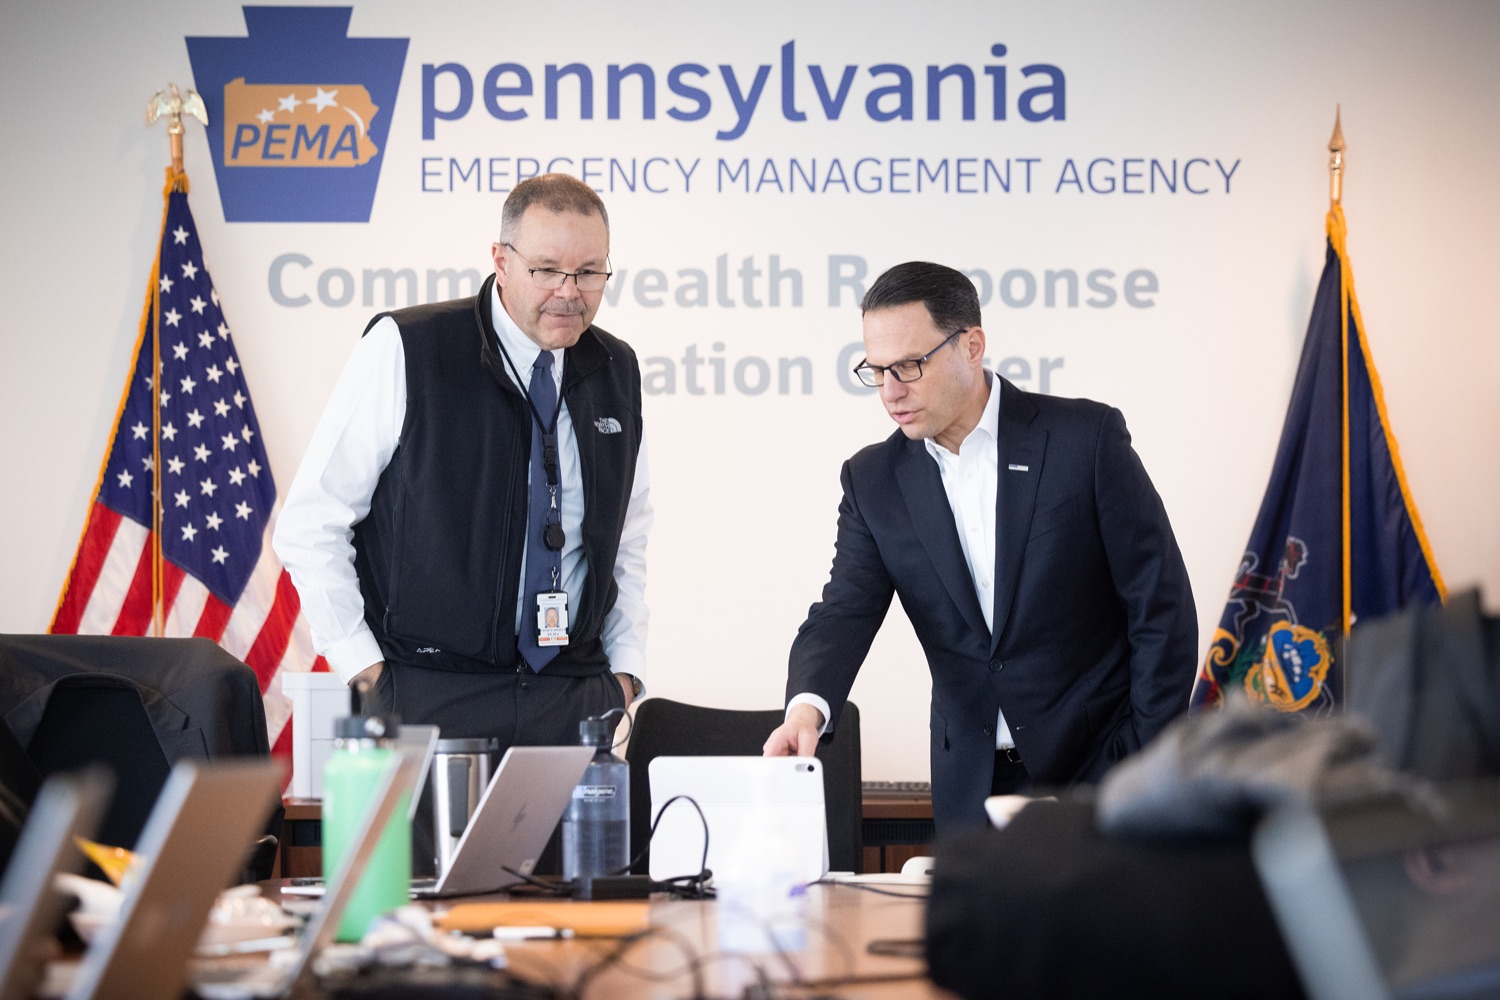 Governor Shapiro consulting with PEMA Director Randy Padfield and emergency management officials before giving urgent update on East Palestine train derailment from the PEMA media center.  FEBRUARY 06, 2023 - HARRISBURG, PA<br><a href="https://filesource.amperwave.net/commonwealthofpa/photo/22620_gov_trainDerailment_dz_008.JPG" target="_blank">⇣ Download Photo</a>